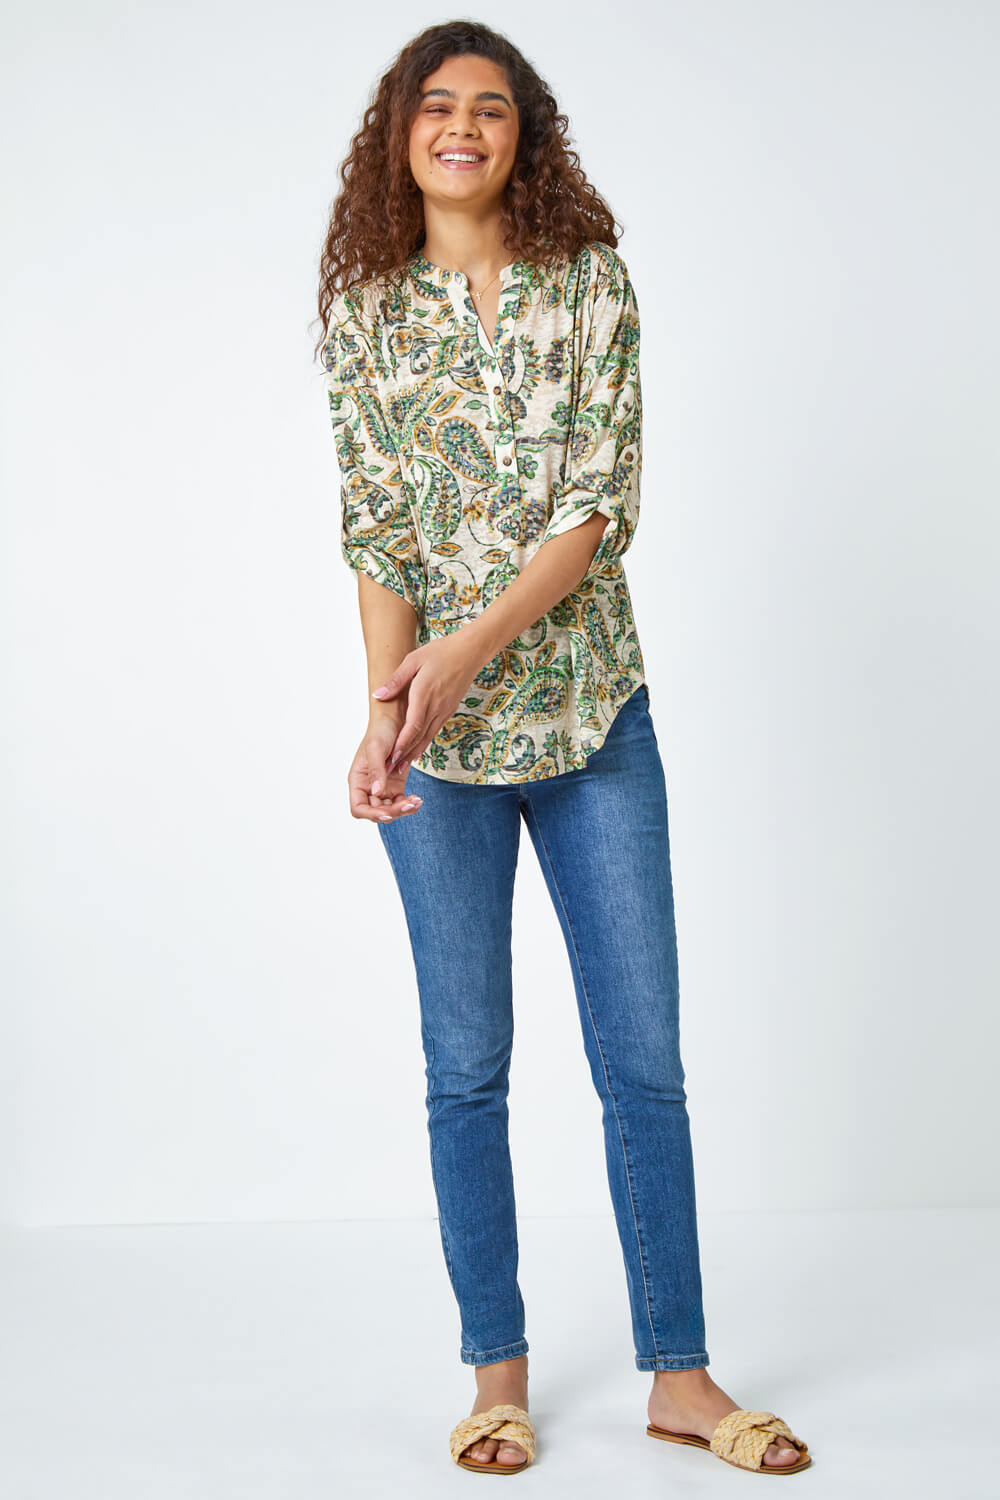 Green Paisley Stretch Jersey Top, Image 2 of 5